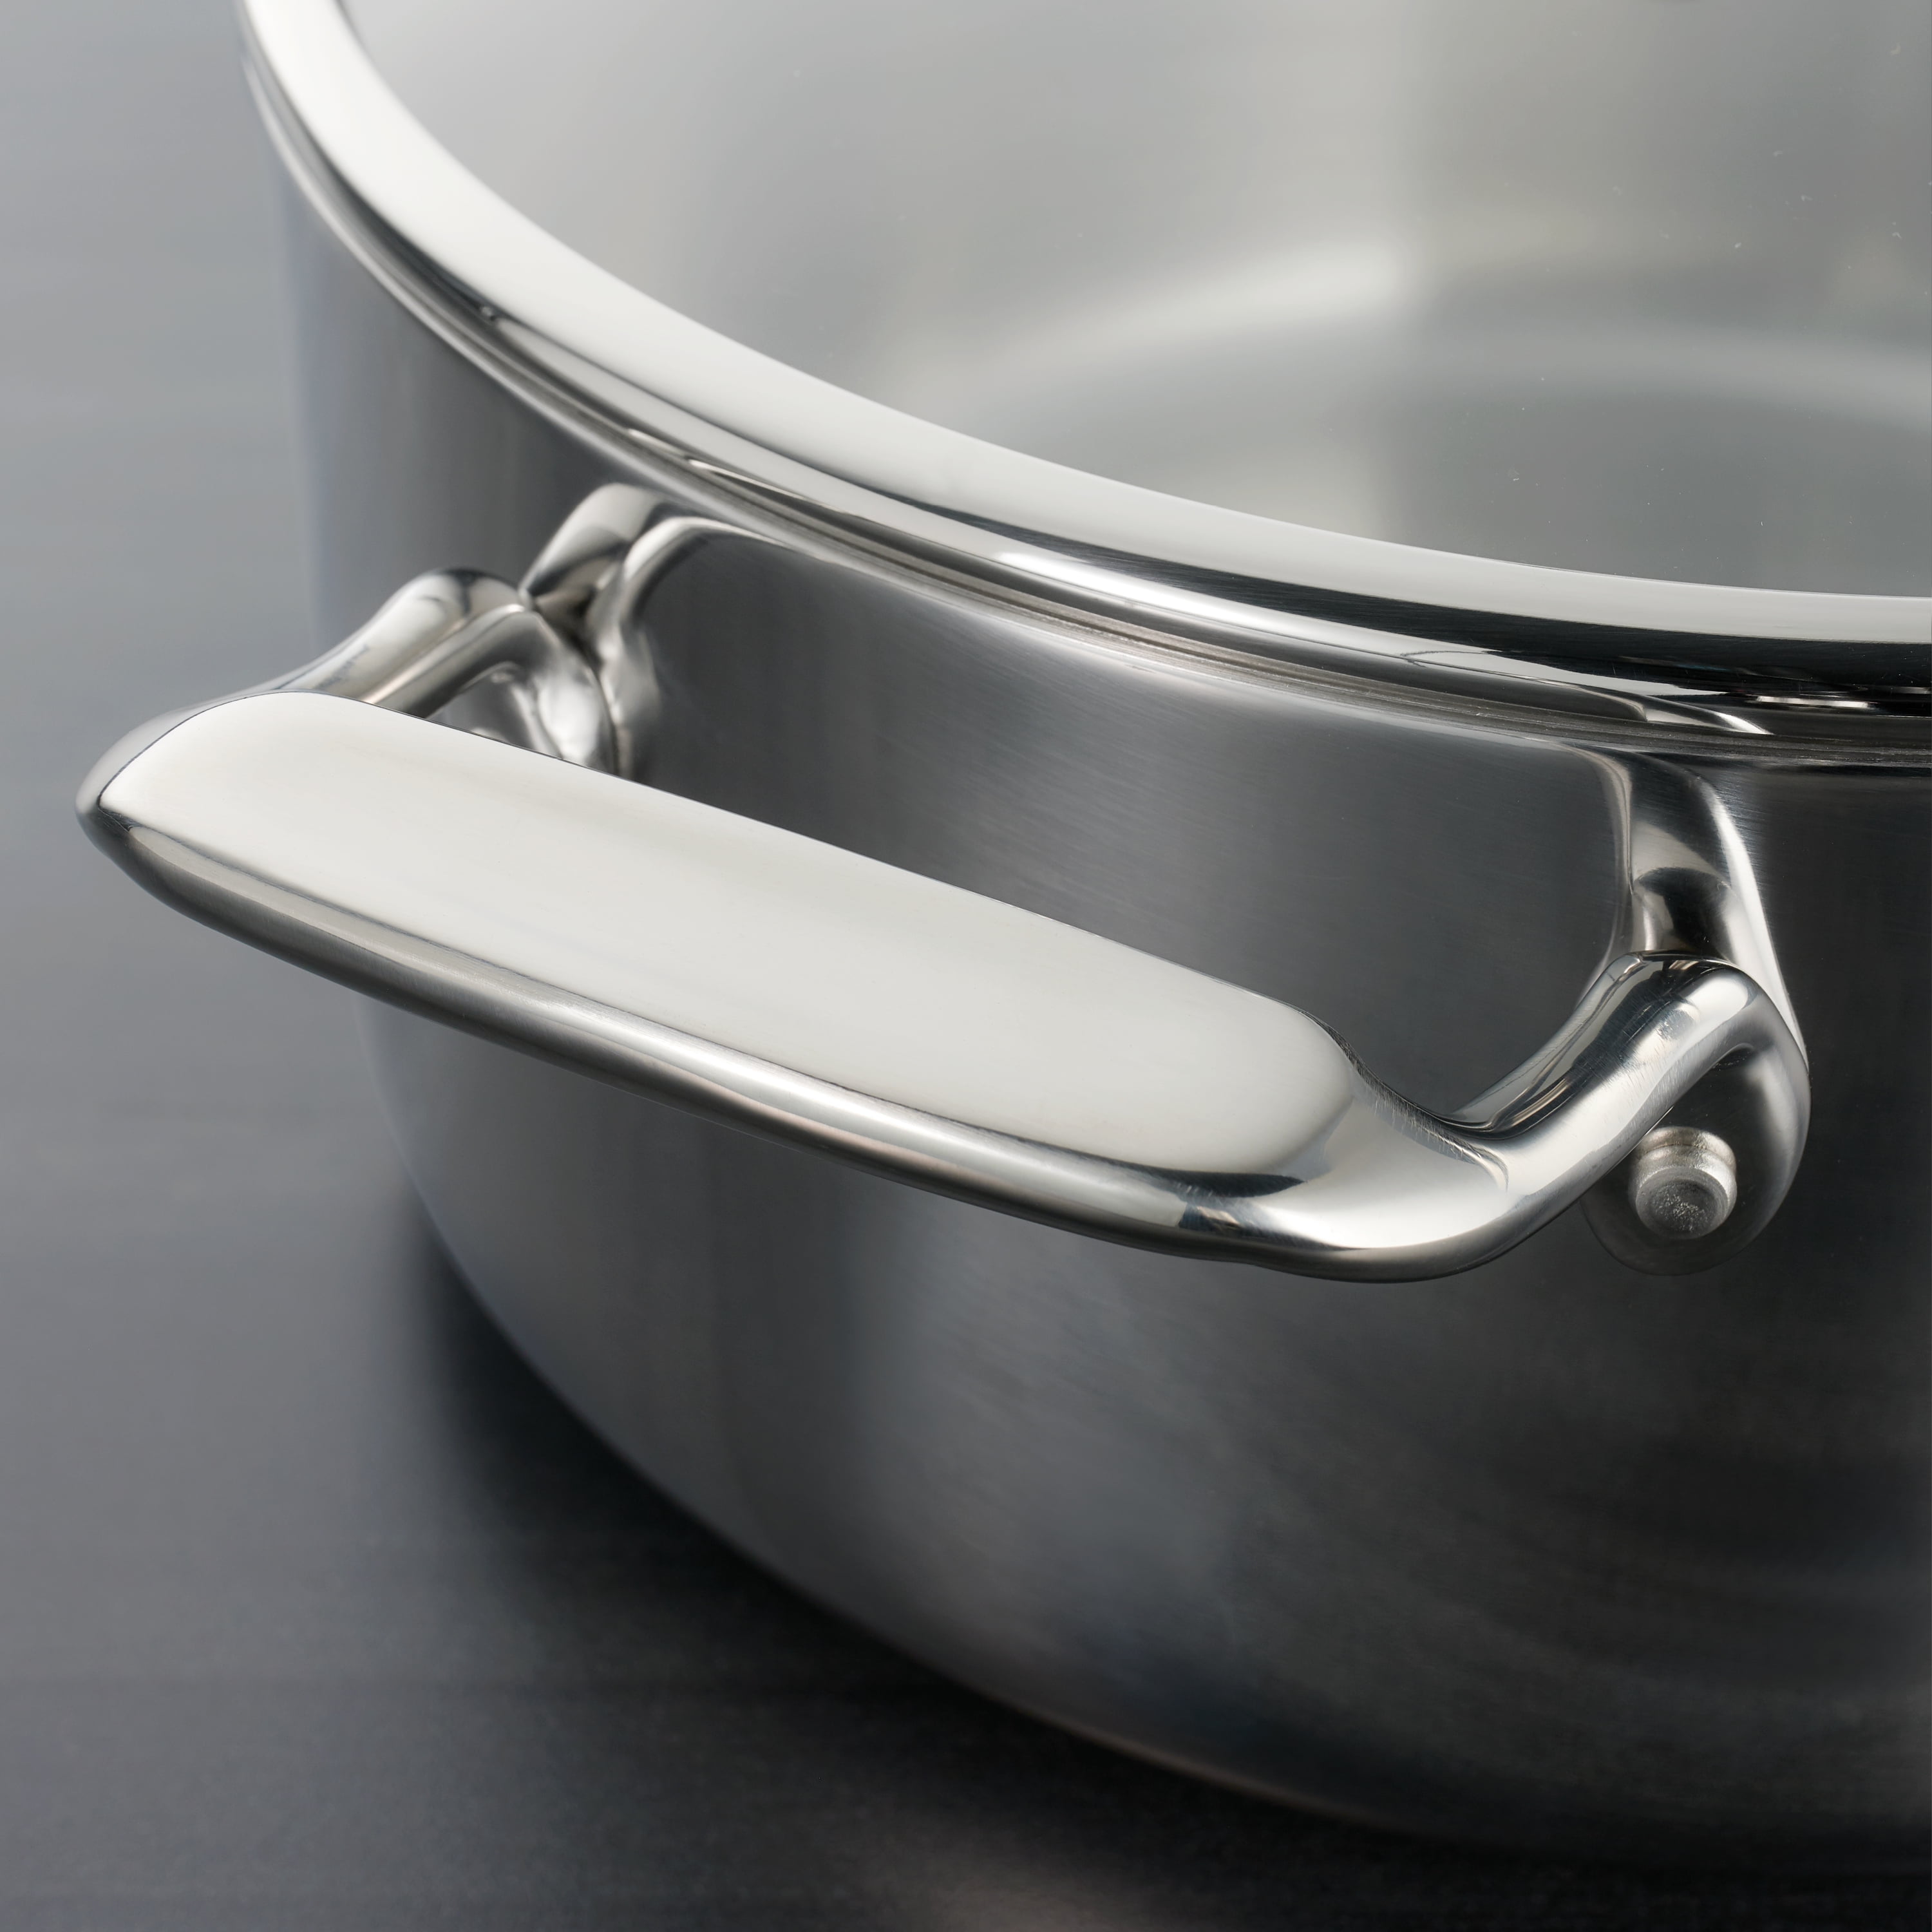 3 Qt Tri-Ply Clad Stainless Steel Covered Braiser